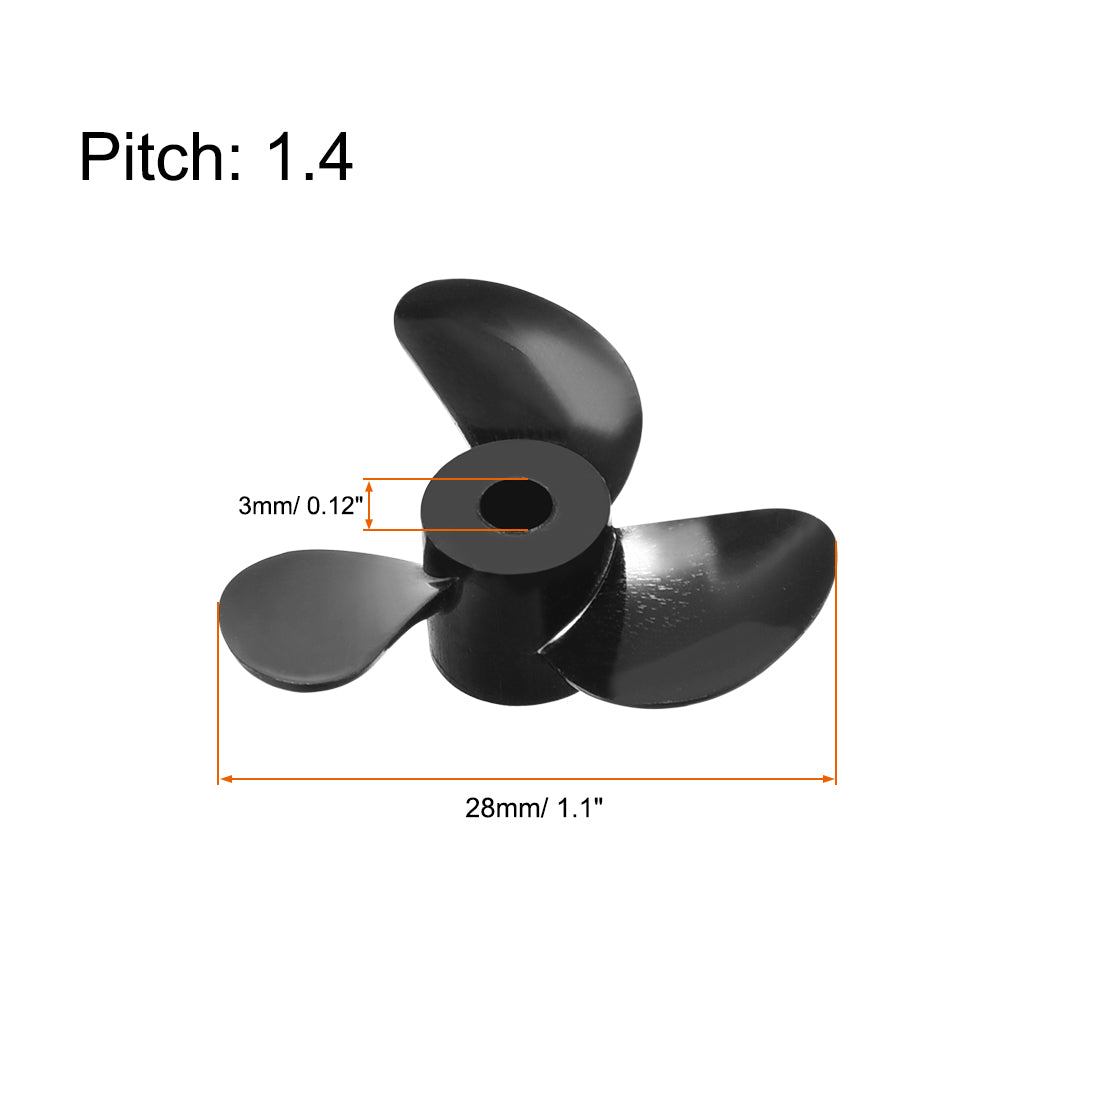 uxcell Uxcell RC Boat CCW Propeller 3mm Shaft 3 Vanes 28mm 1.4 P Fan Shape Pastic Black Rotating Propeller Props for RC Boat 2pcs